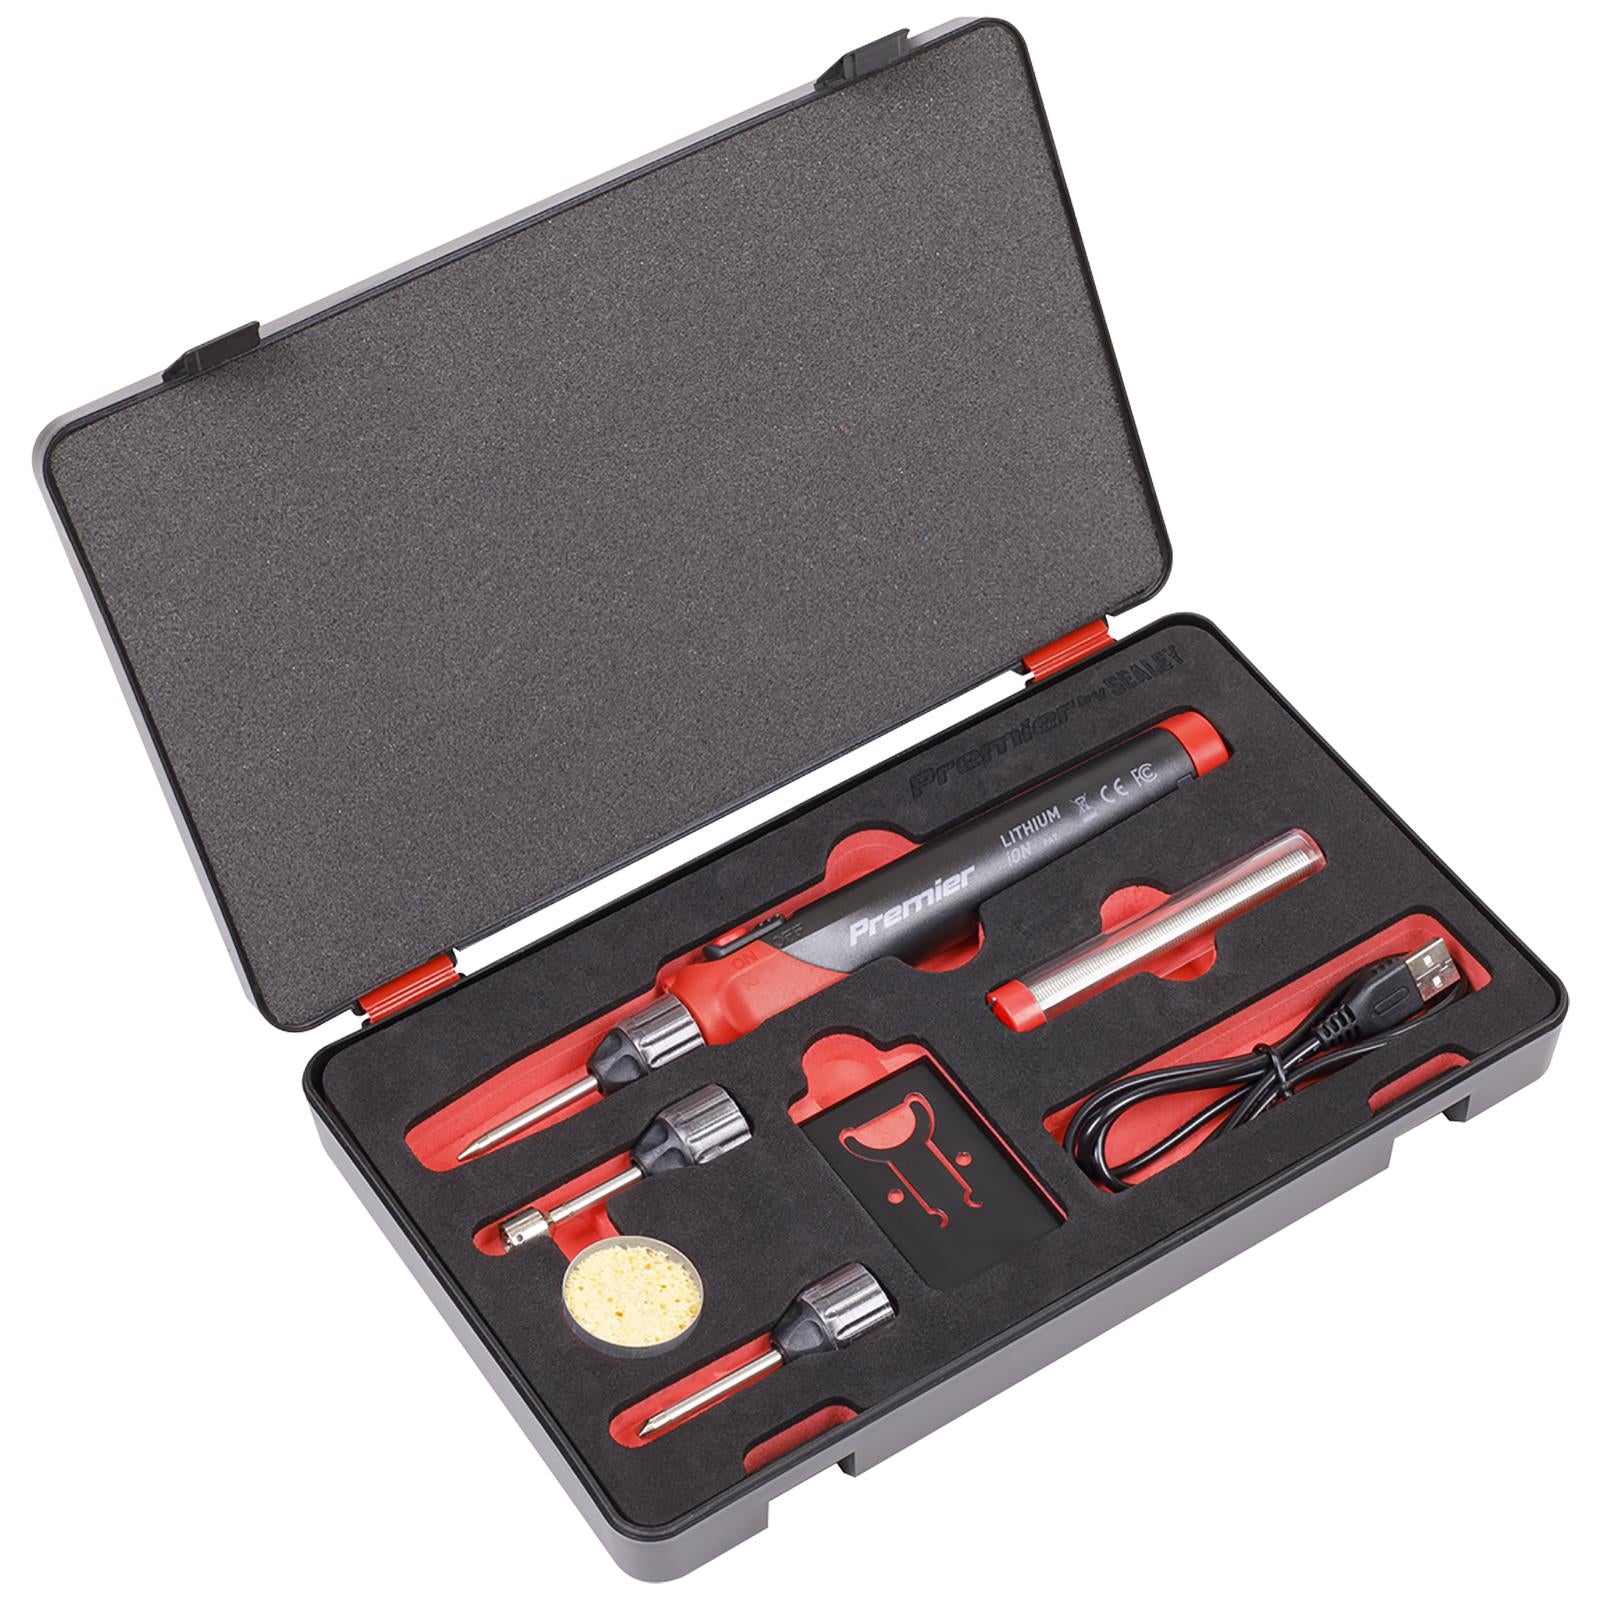 Sealey Premier Soldering Iron Kit Rechargeable Lithium-ion 30W